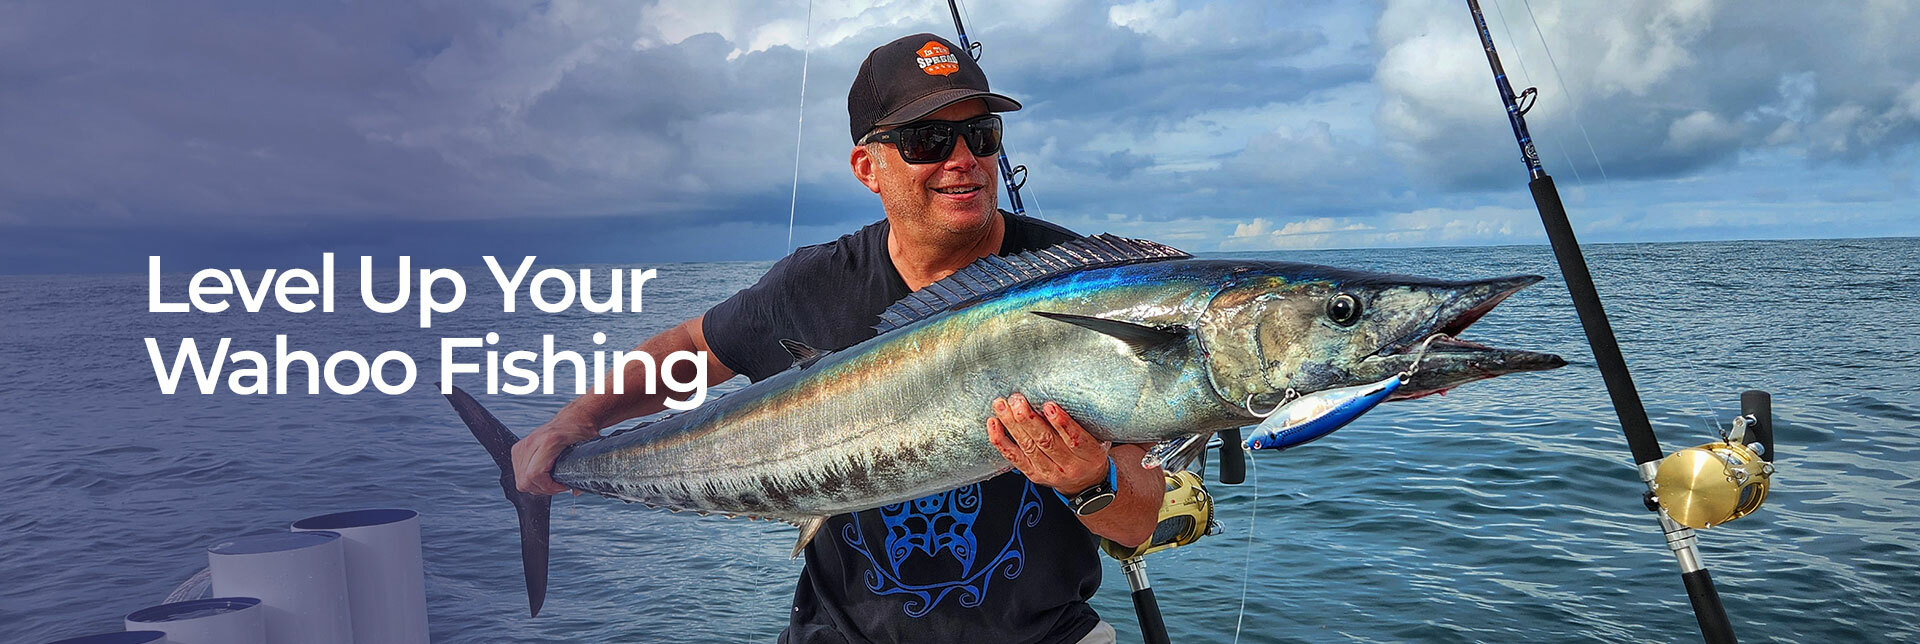 Wahoo – Level Up Your Wahoo Fishing, In the Spread Home Slider